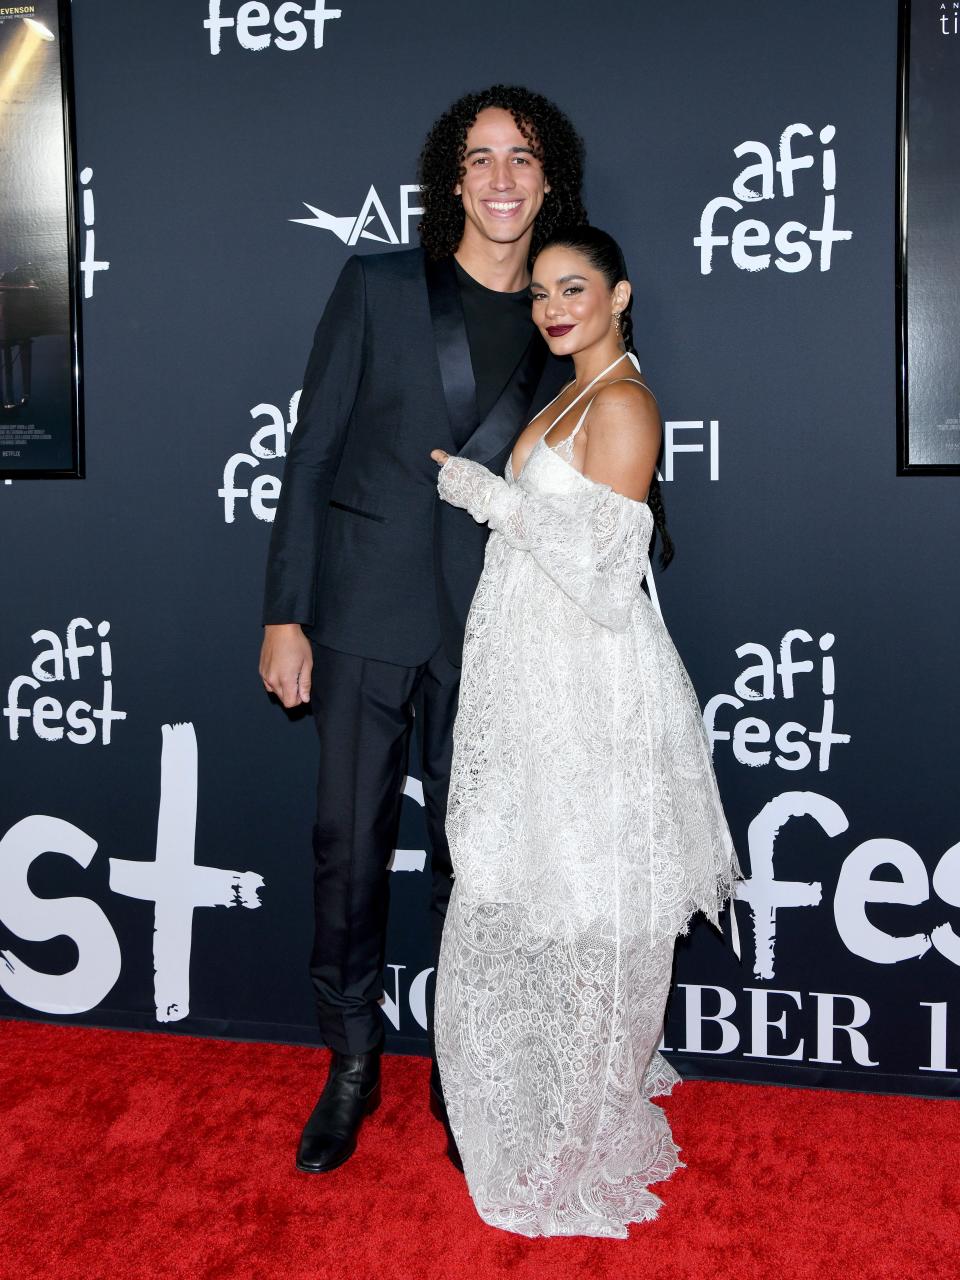 HOLLYWOOD, CALIFORNIA - NOVEMBER 10: Cole Tucker and Vanessa Hudgens attend the 2021 AFI Fest - Opening Night Gala Premiere of Netflix's "tick, tickâ€¦BOOM" at TCL Chinese Theatre on November 10, 2021 in Hollywood, California. (Photo by Axelle/Bauer-Griffin/FilmMagic)